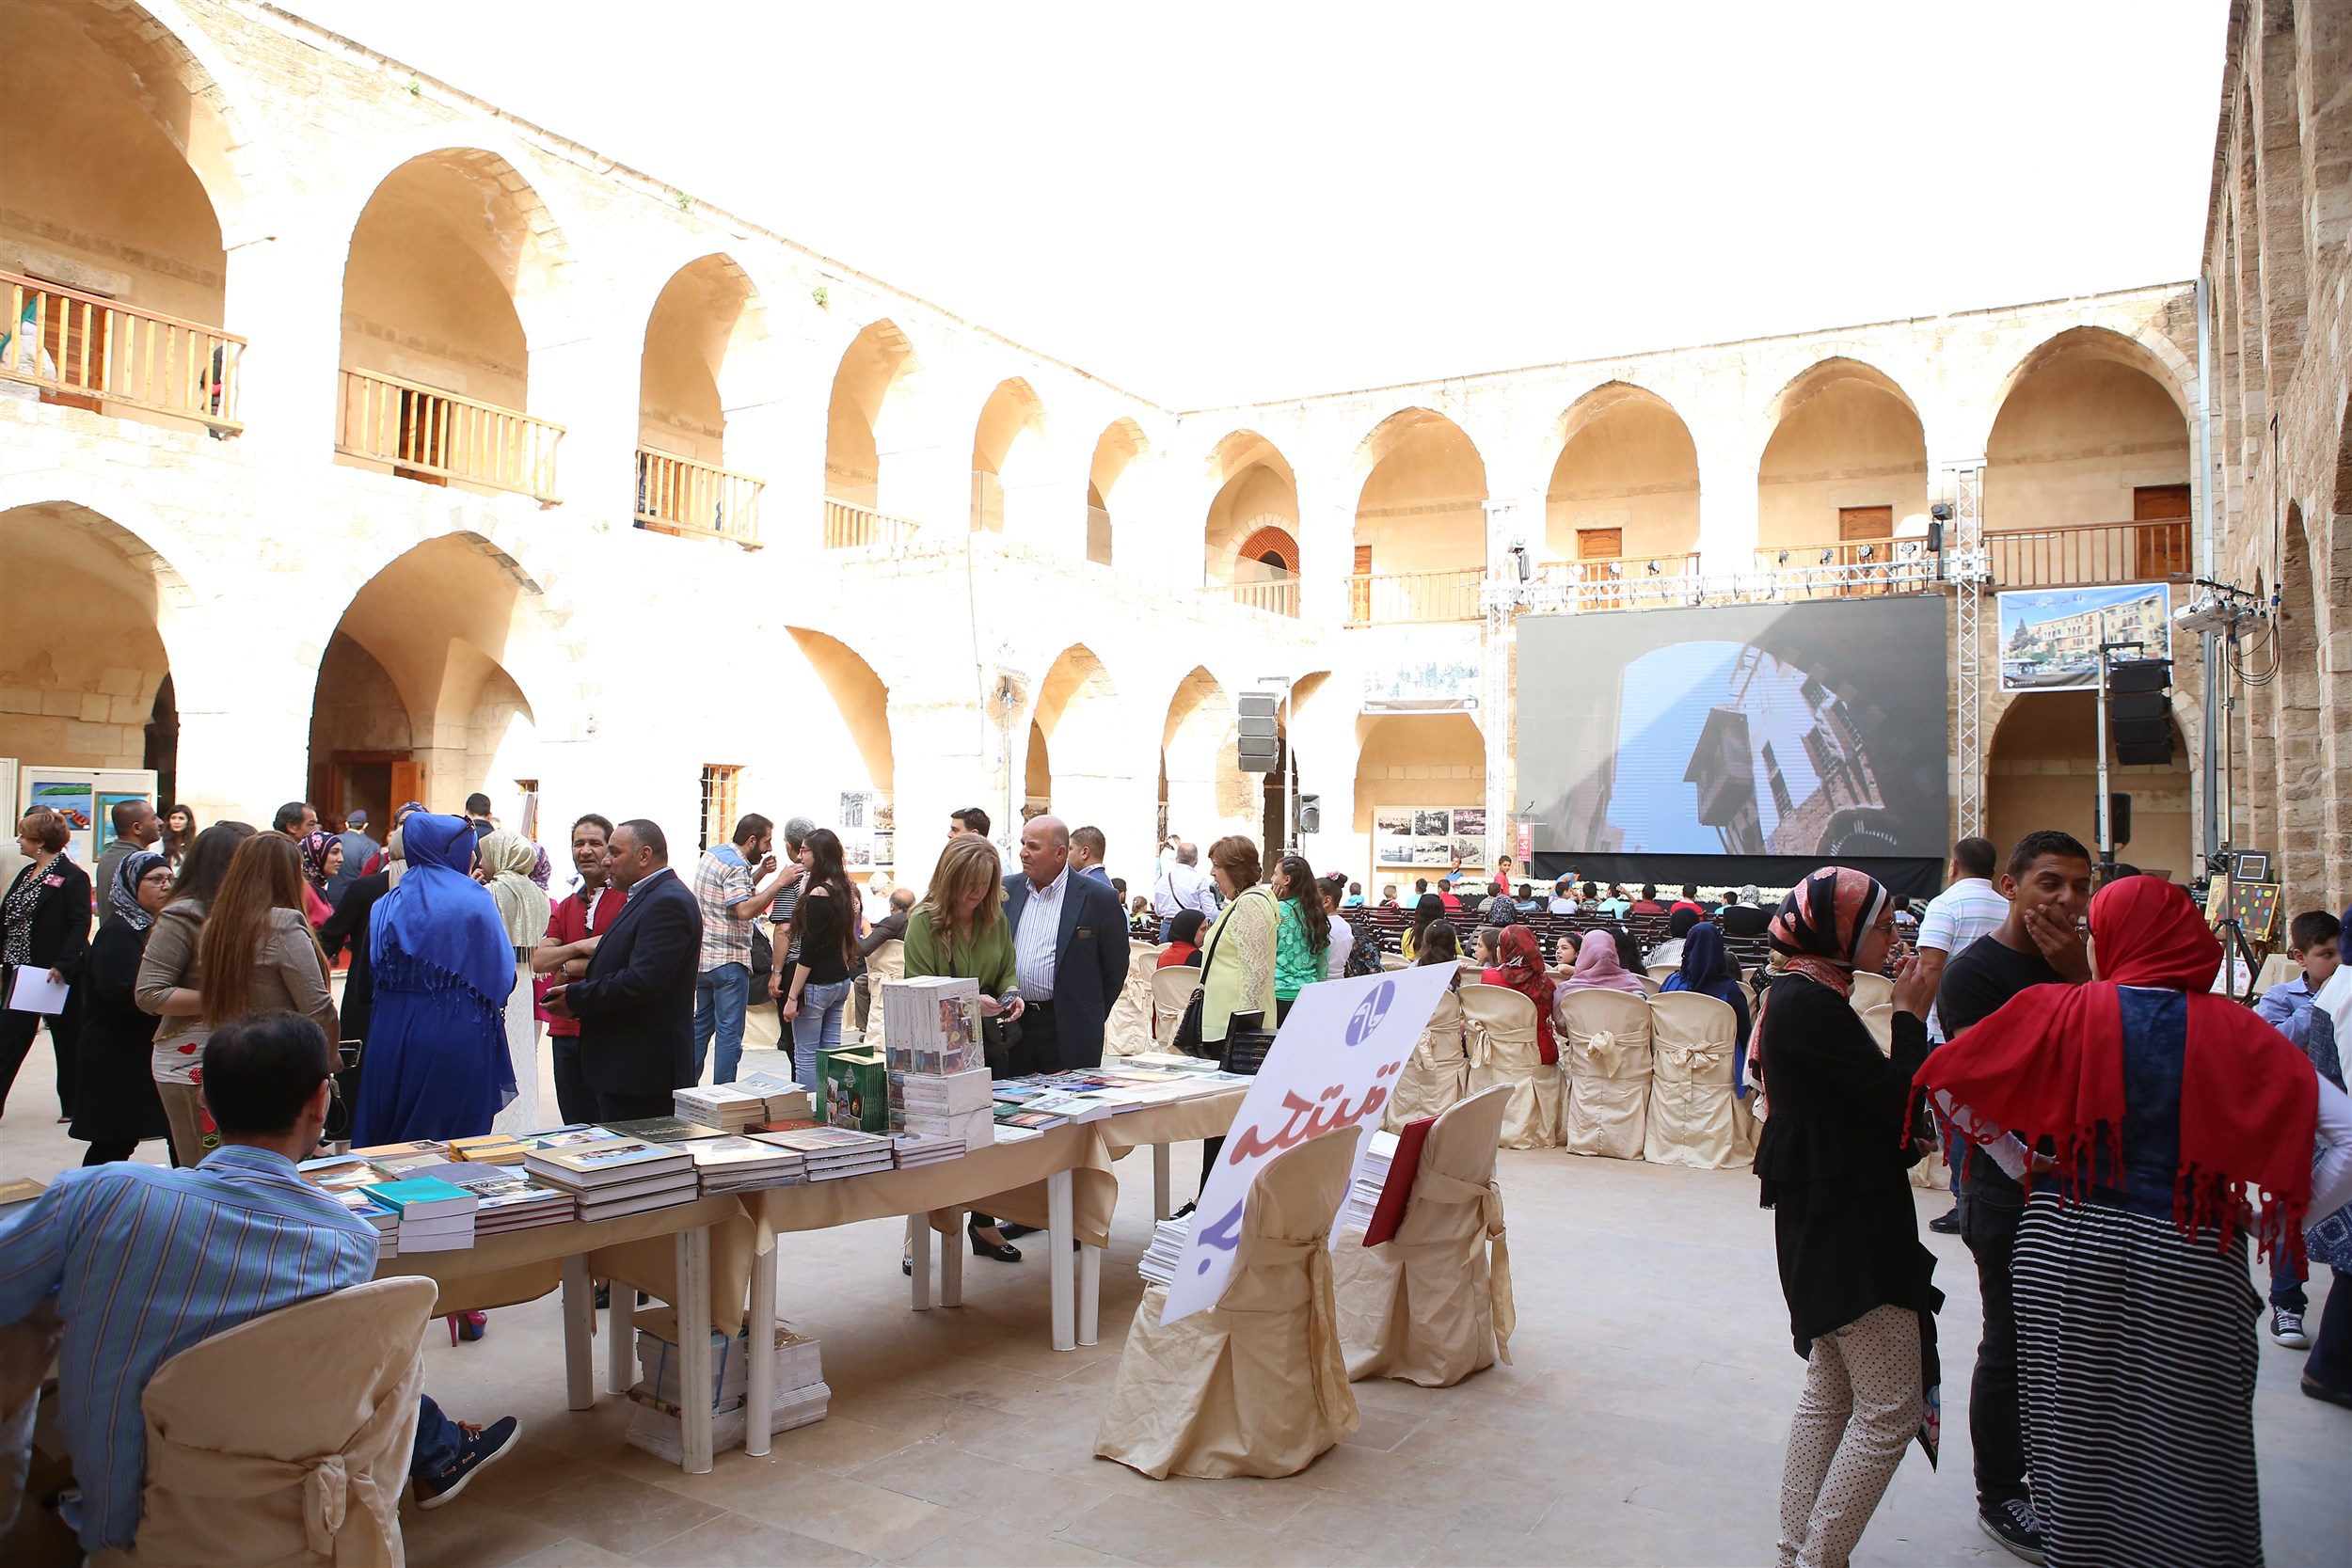 visitors engaged in various activities during the exhibition